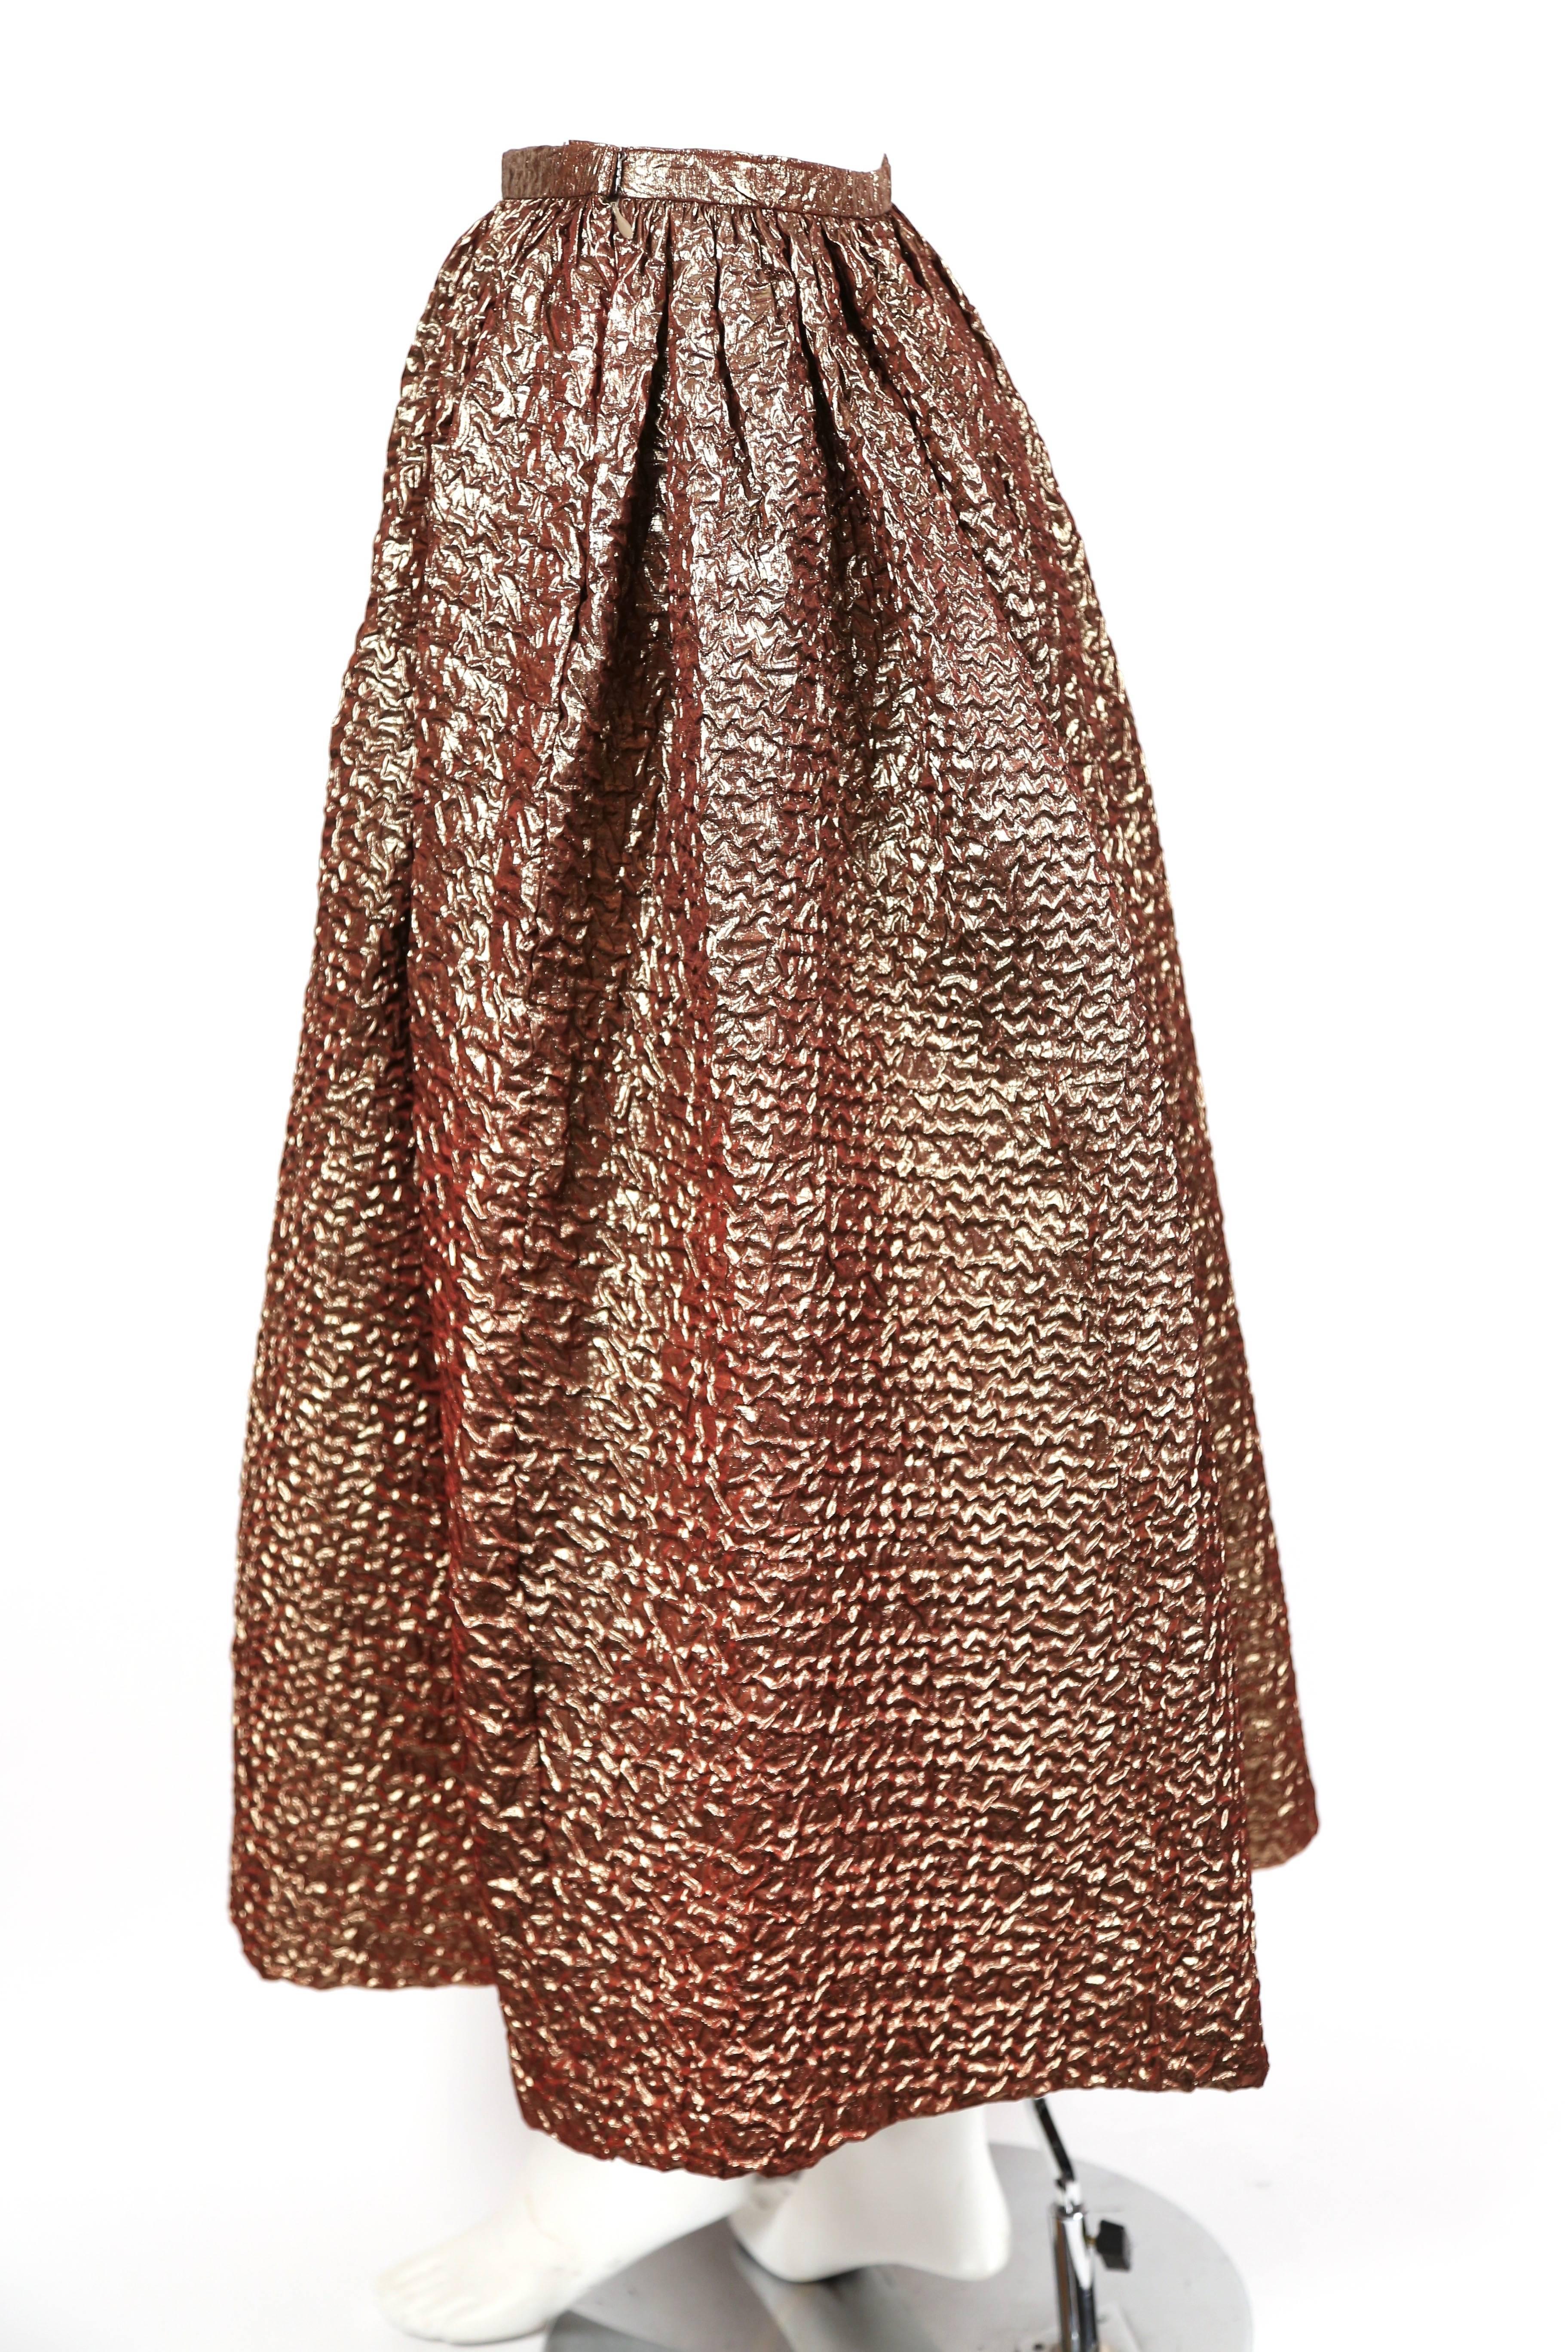 Stunning iridescent bronze skirt made of cloque fabric designed by Bill Blass dating to the 1980's. Skirt is labeled a U.S. 4 however it best fits a modern US size 0-2. Approximate measurements: waist 23.5